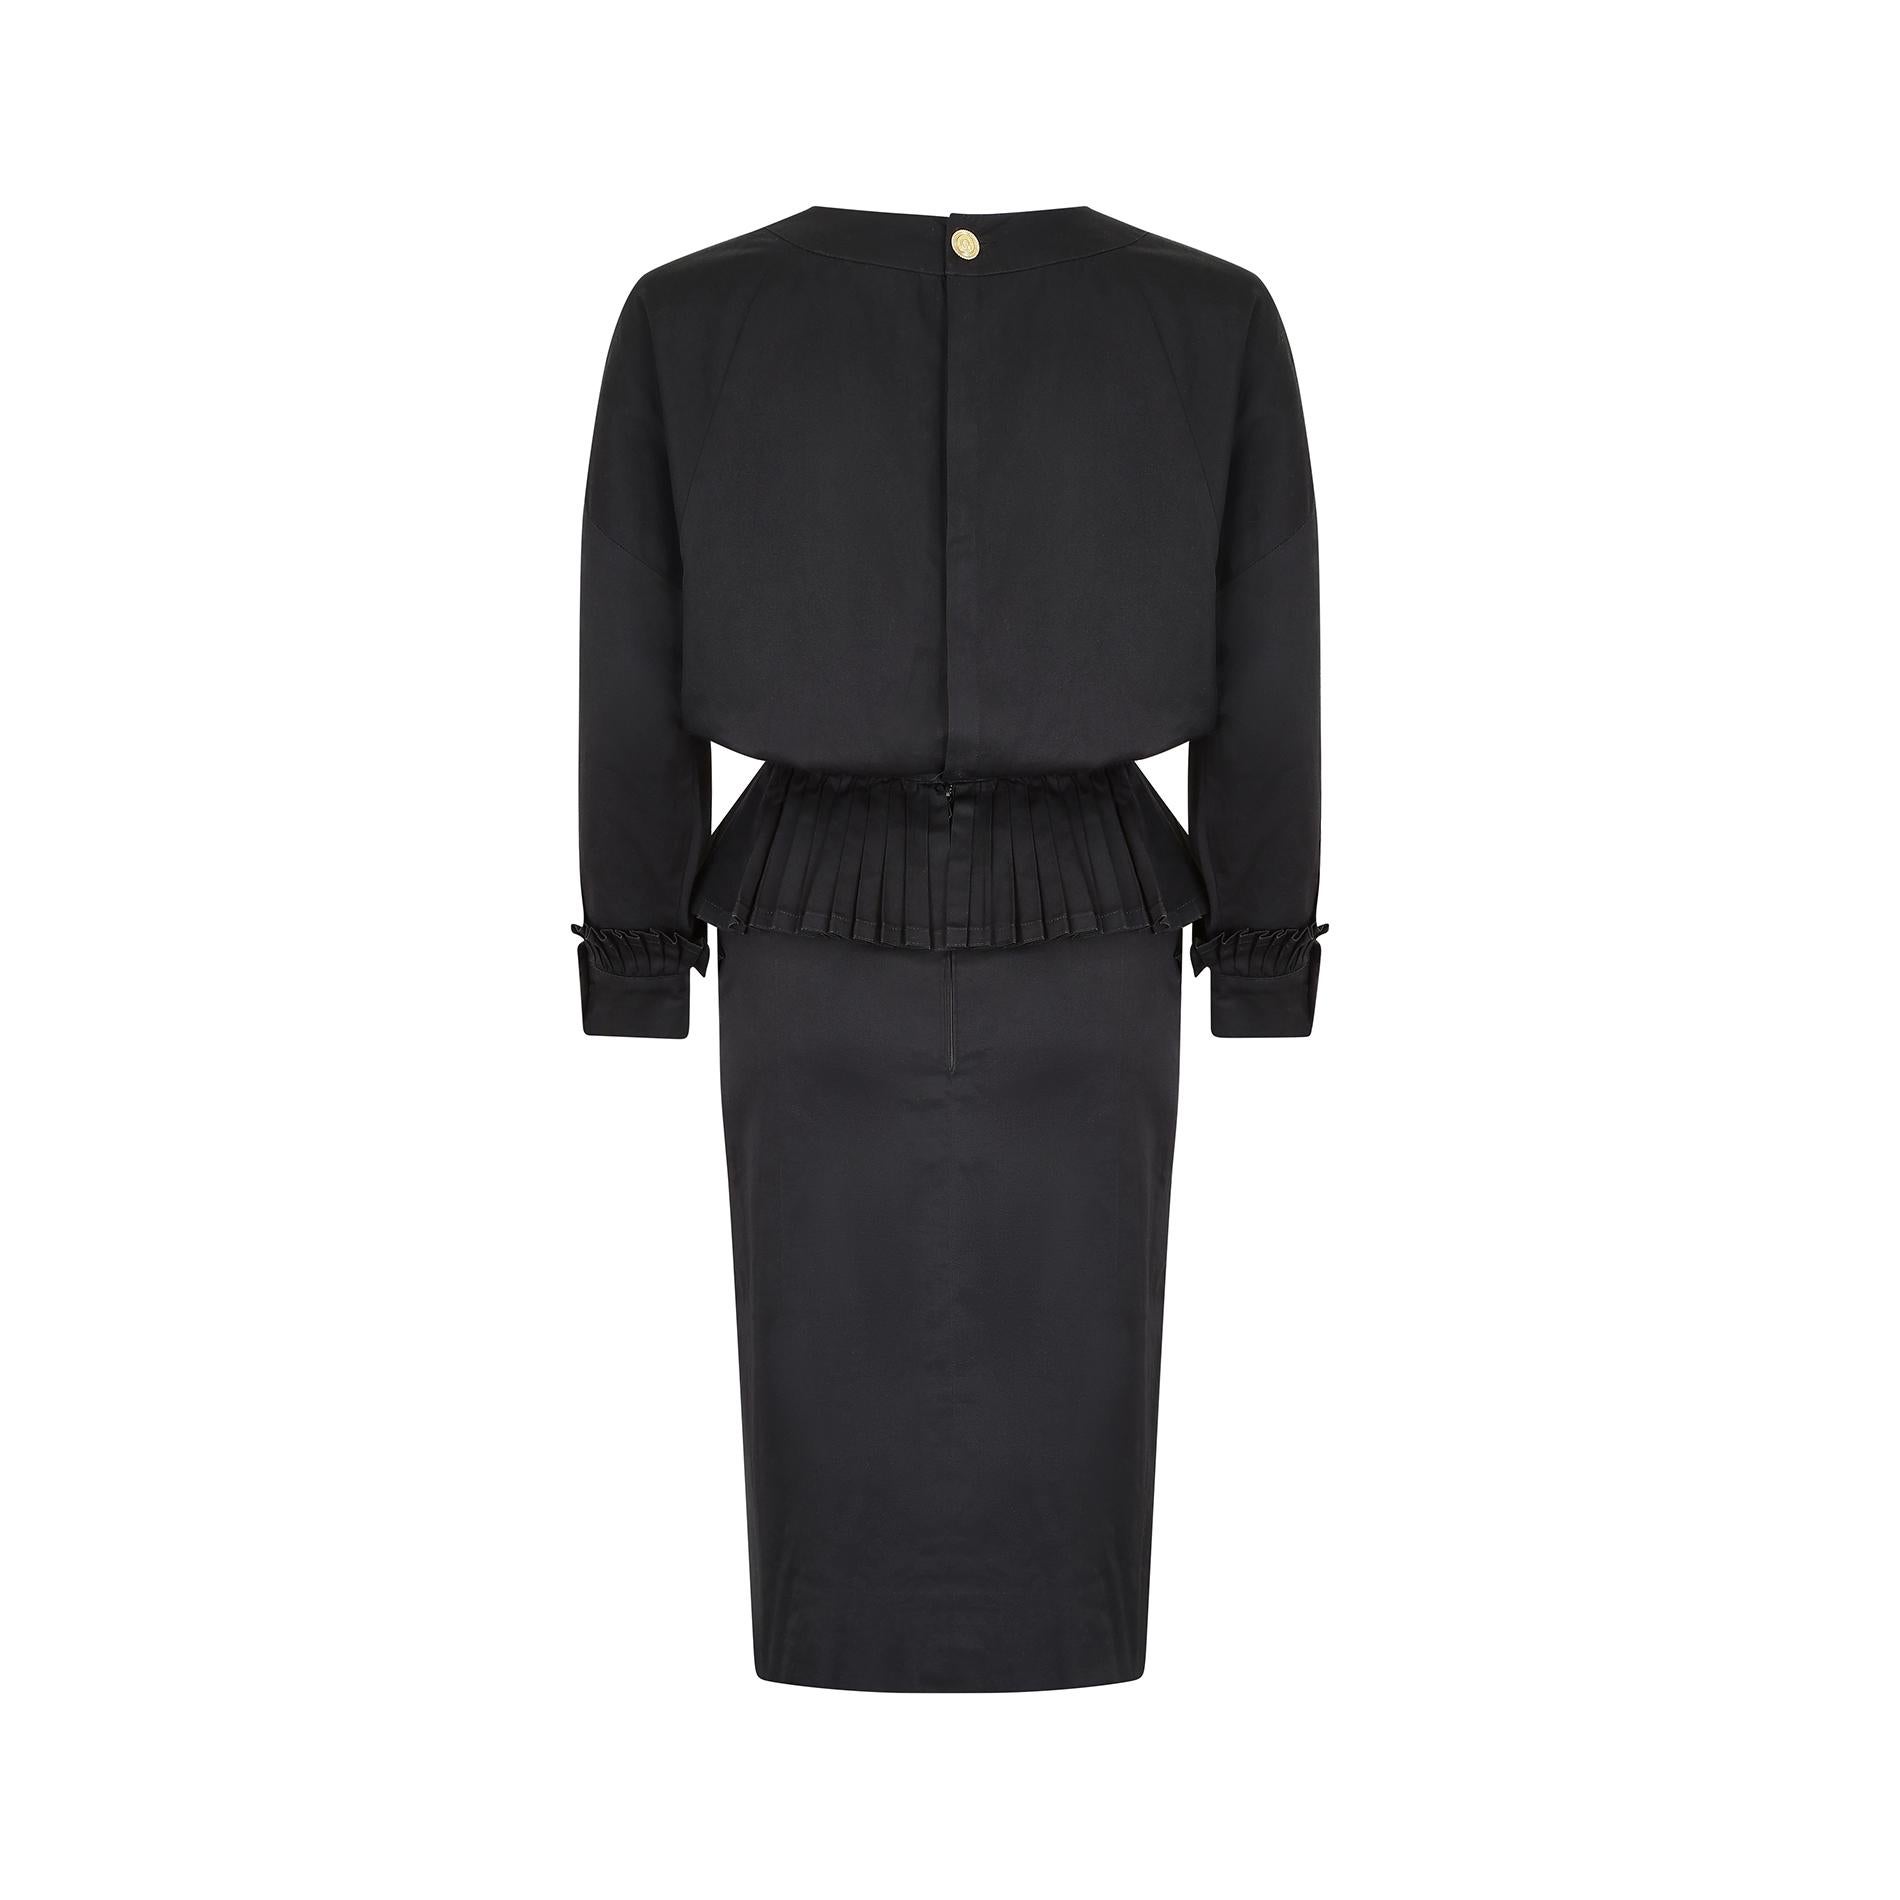 1986 Runway Chanel Black Cotton Peplum Dress In Excellent Condition For Sale In London, GB